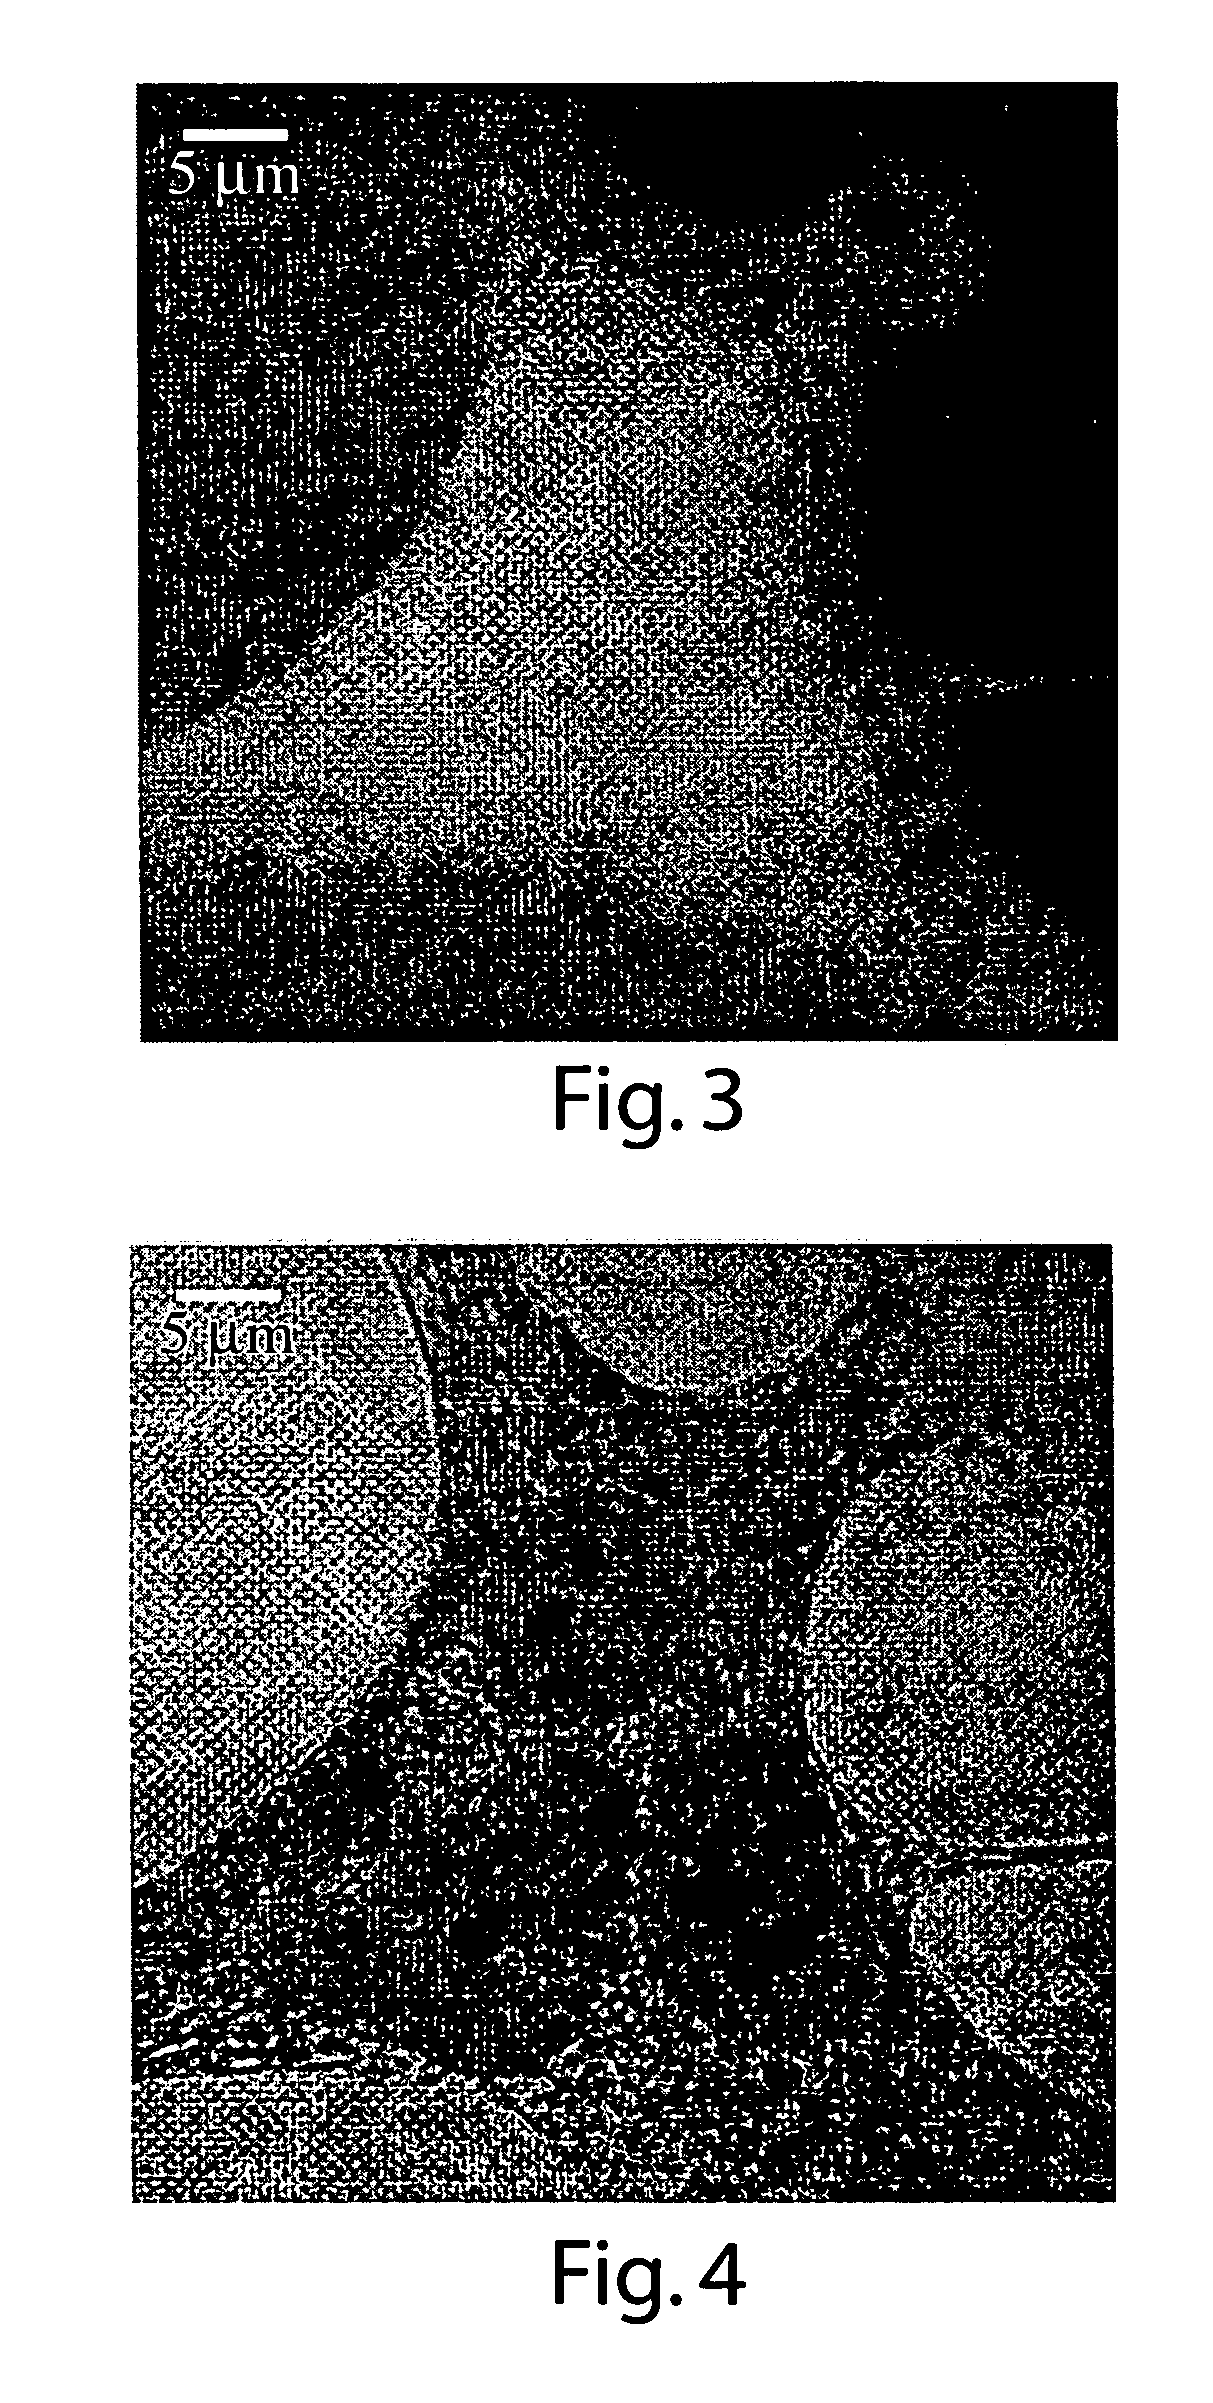 Method and apparatus for UV imaging